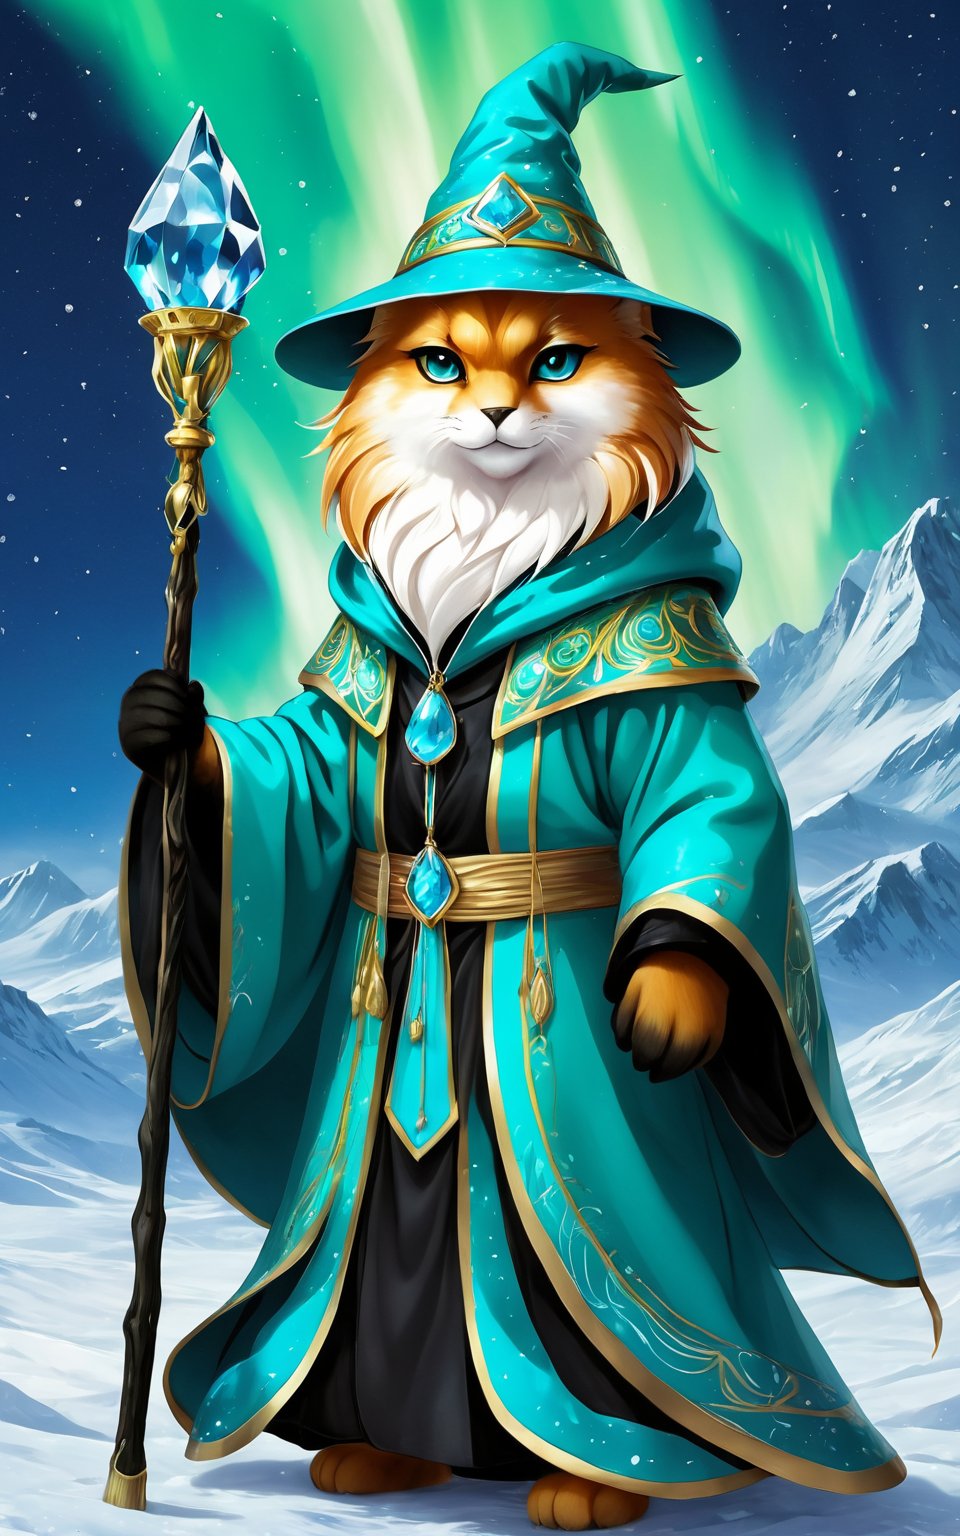 (best quality,8K,highres,masterpiece), ultra-detailed, (Suzaku in polar region with crystal teardrops, wizard robes, and turquoise hat), a petite and cute Suzaku walking alone in the polar region, with crystal teardrops hanging on its fur. The Suzaku is adorned in stylish black wizard robes and a gorgeous turquoise wizard's hat, the color contrasting with the dark, rainy surroundings. This evocative image, whether a painting or a stunning photograph, captures the raw emotion of the little creature's journey through the beautiful aurora. The detail is impeccable, from the intricate patterns on the clothes to the sad expressions on the faces, making this a truly captivating portrayal of solitude and beauty in the icy wilderness.